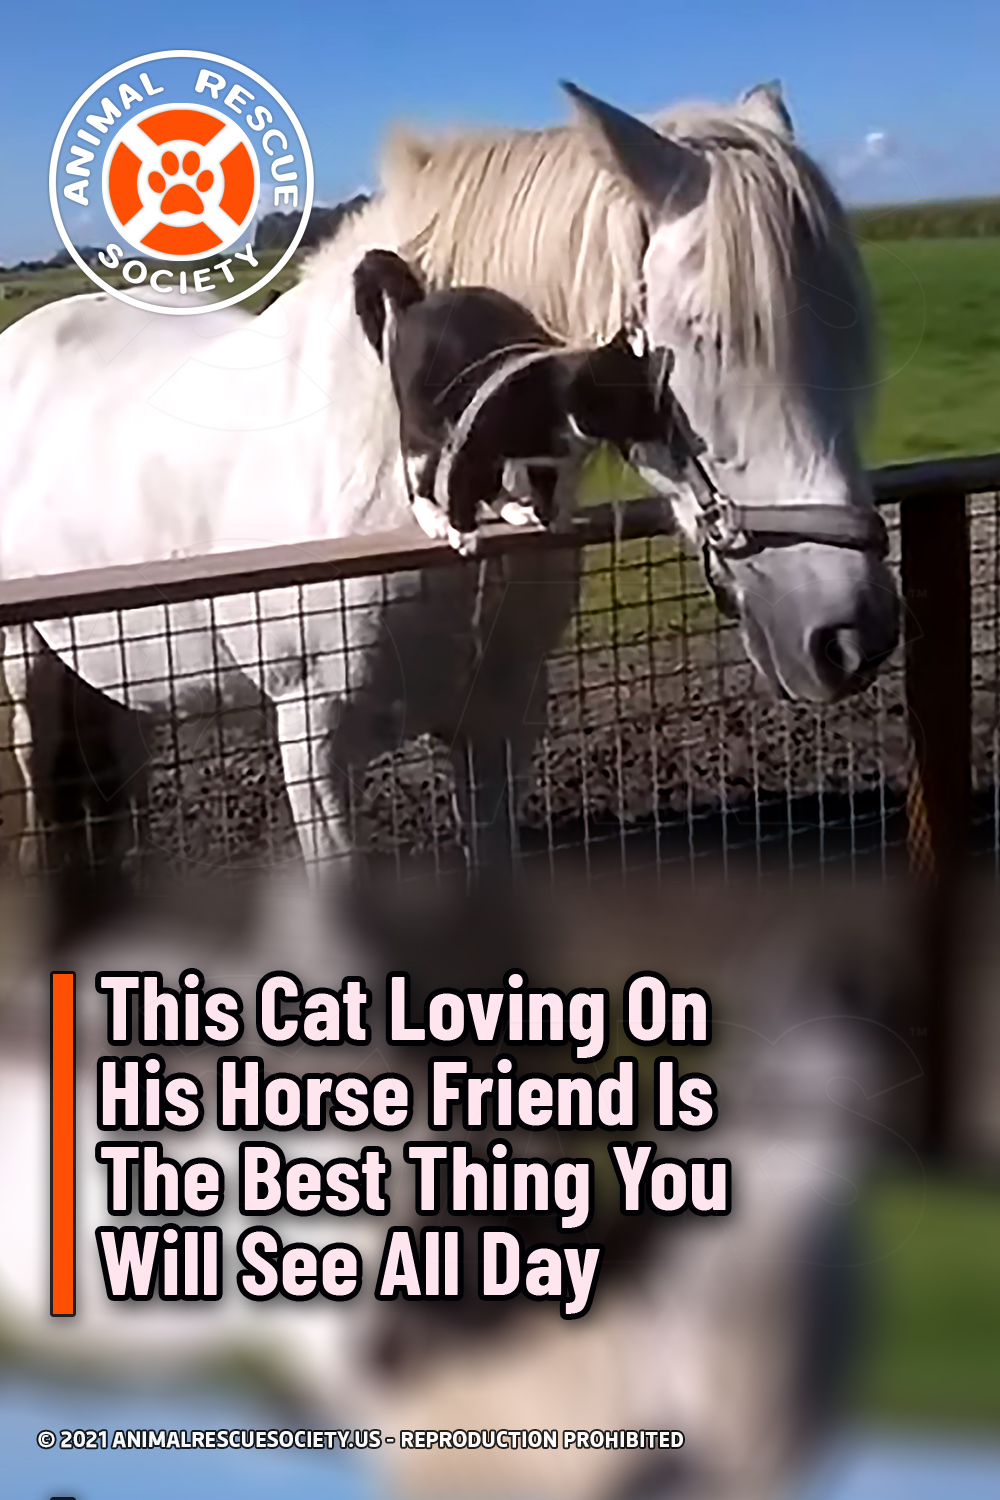 This Cat Loving On His Horse Friend Is The Best Thing You Will See All Day